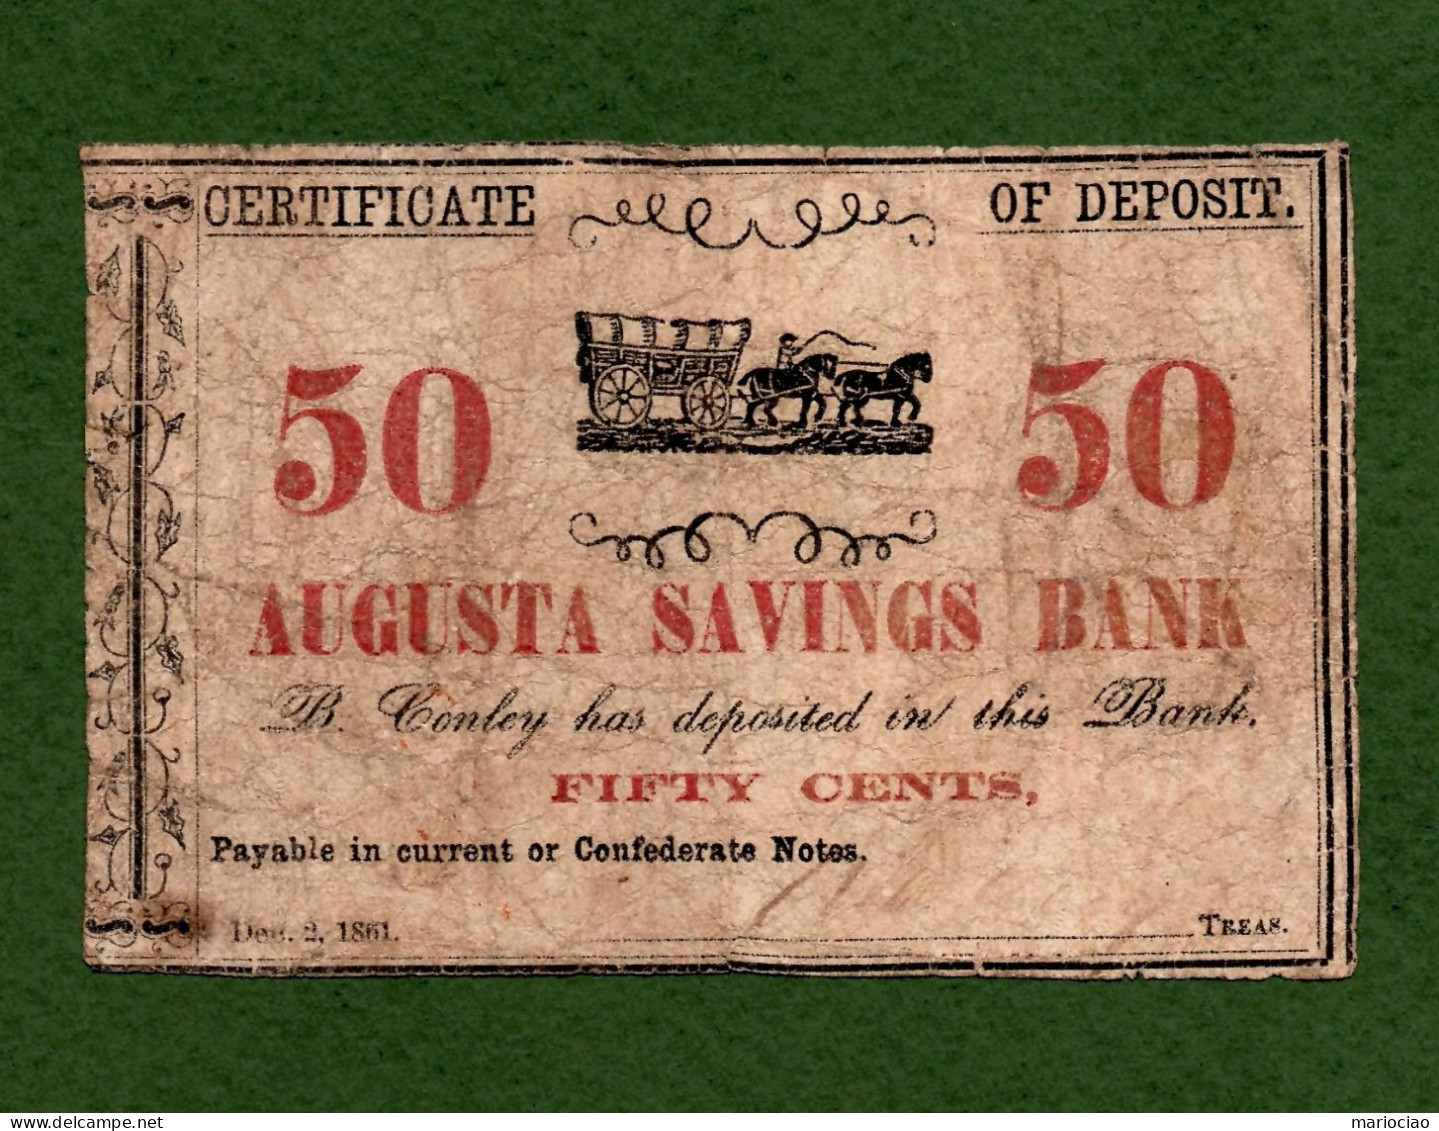 USA Note CIVIL WAR Augusta Savings Bank GEORGIA 1861 Pay 50 Cents In CONFEDERATE Notes COVERED WAGON - Confederate Currency (1861-1864)